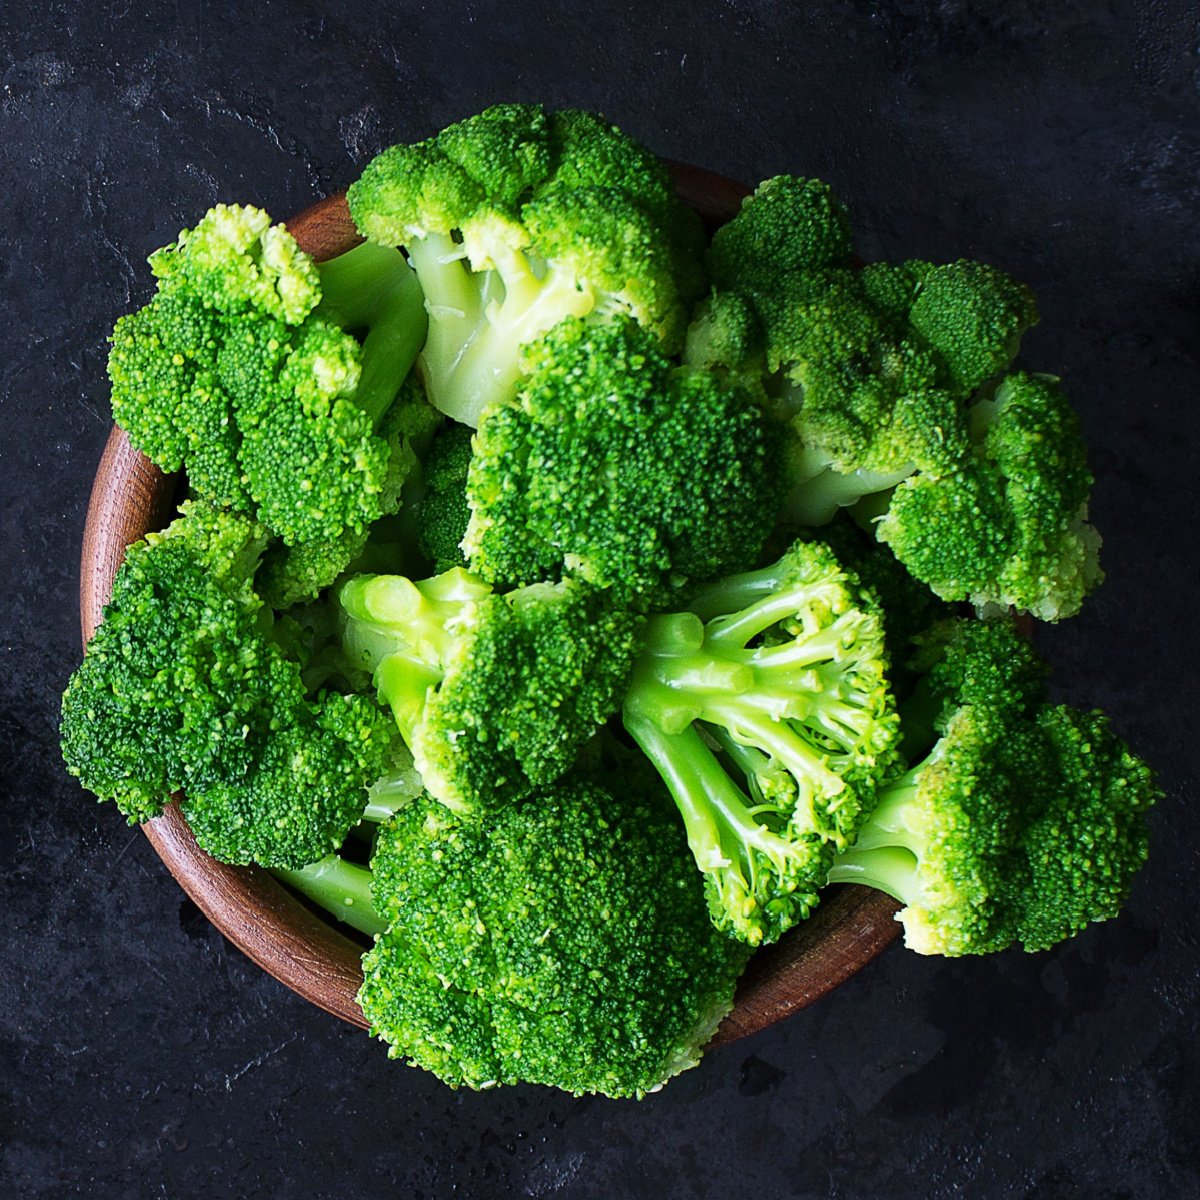 raw broccoli heads in a wooden bowl